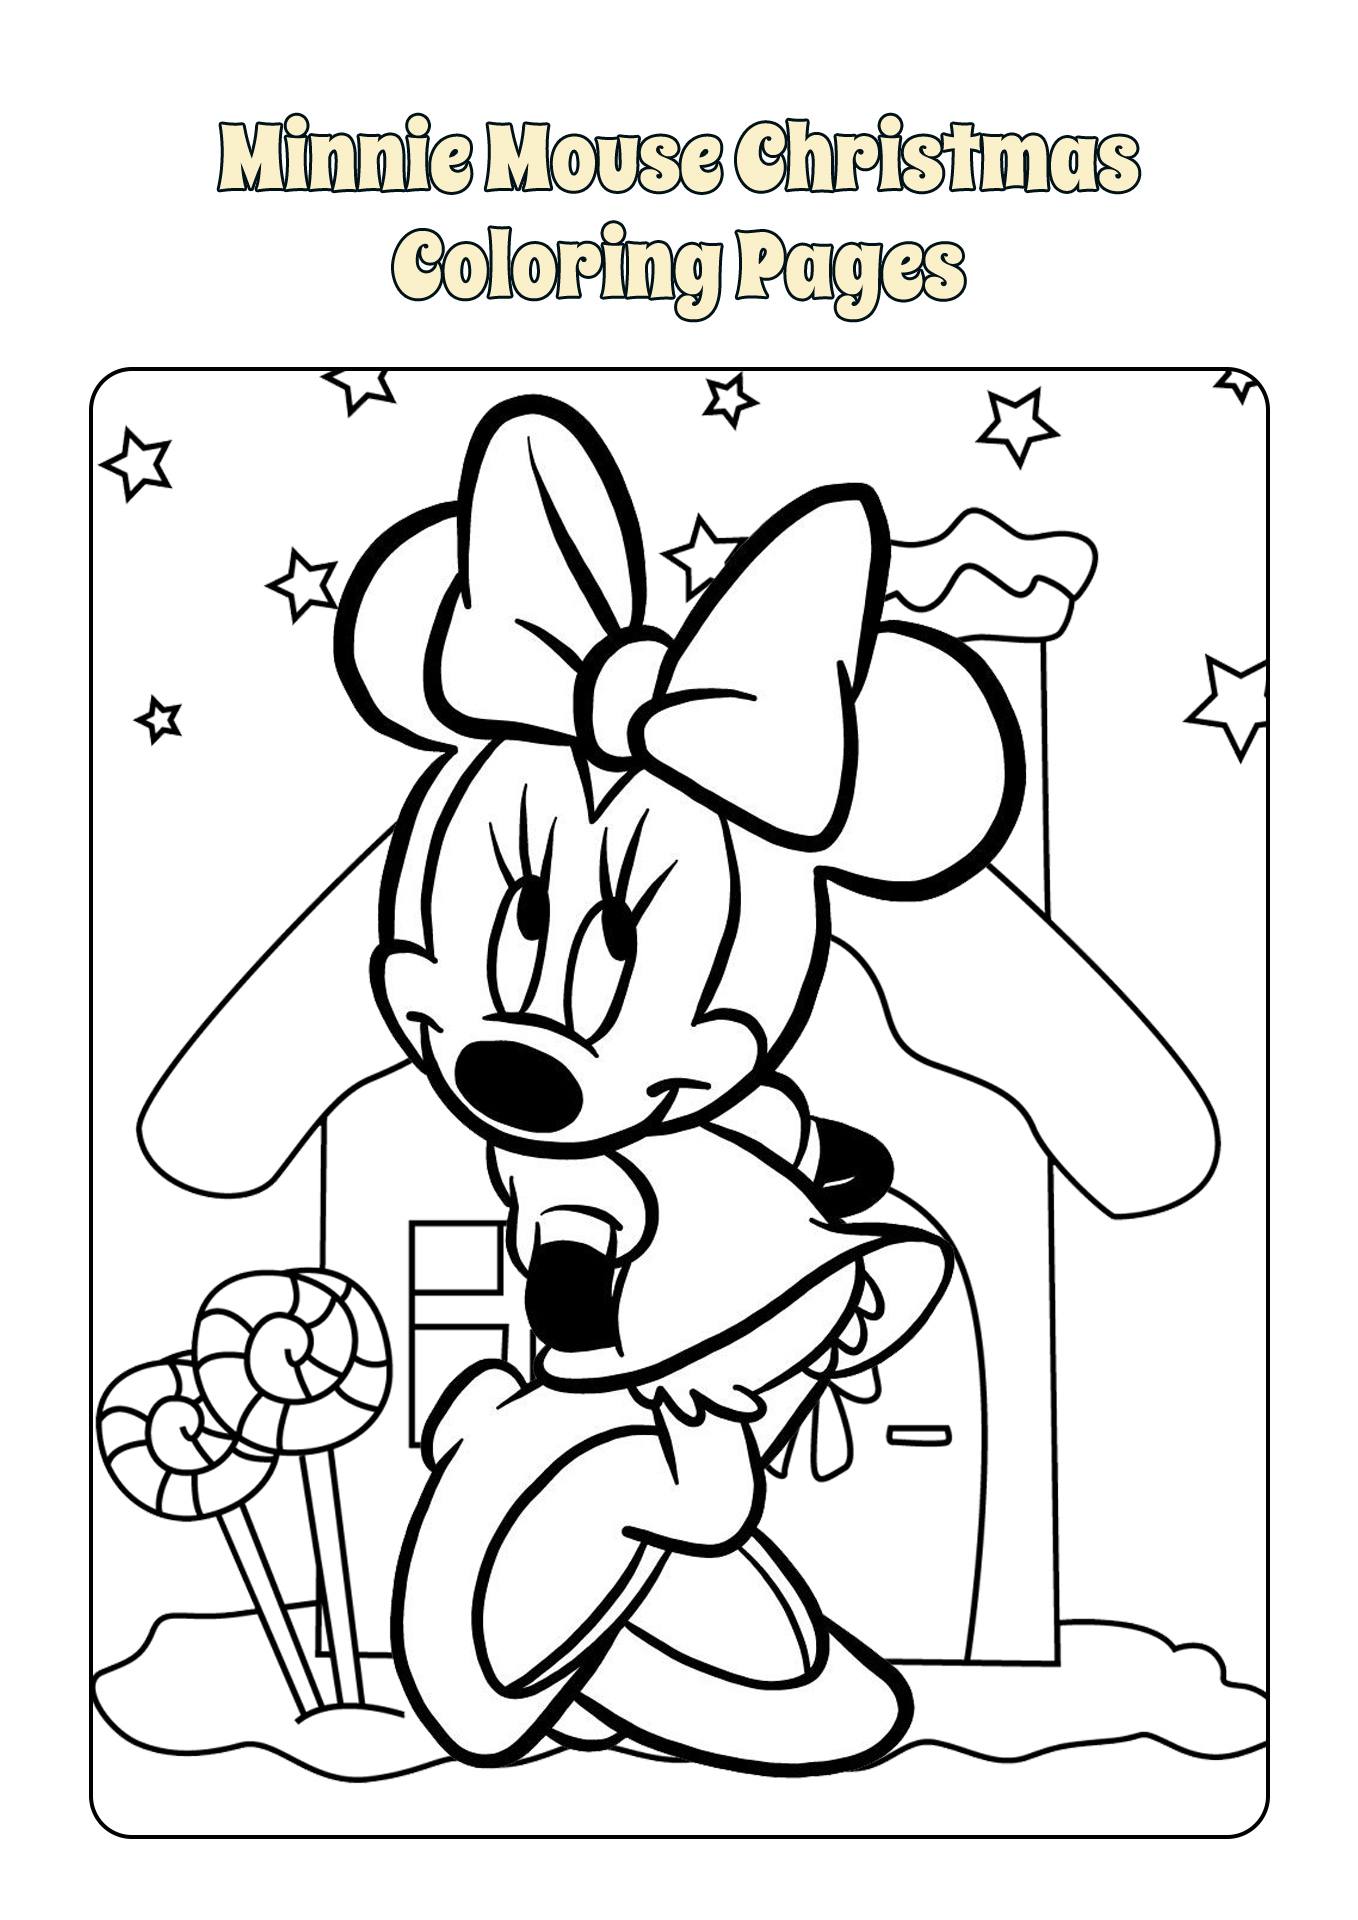 Minnie Mouse Christmas Coloring Pages